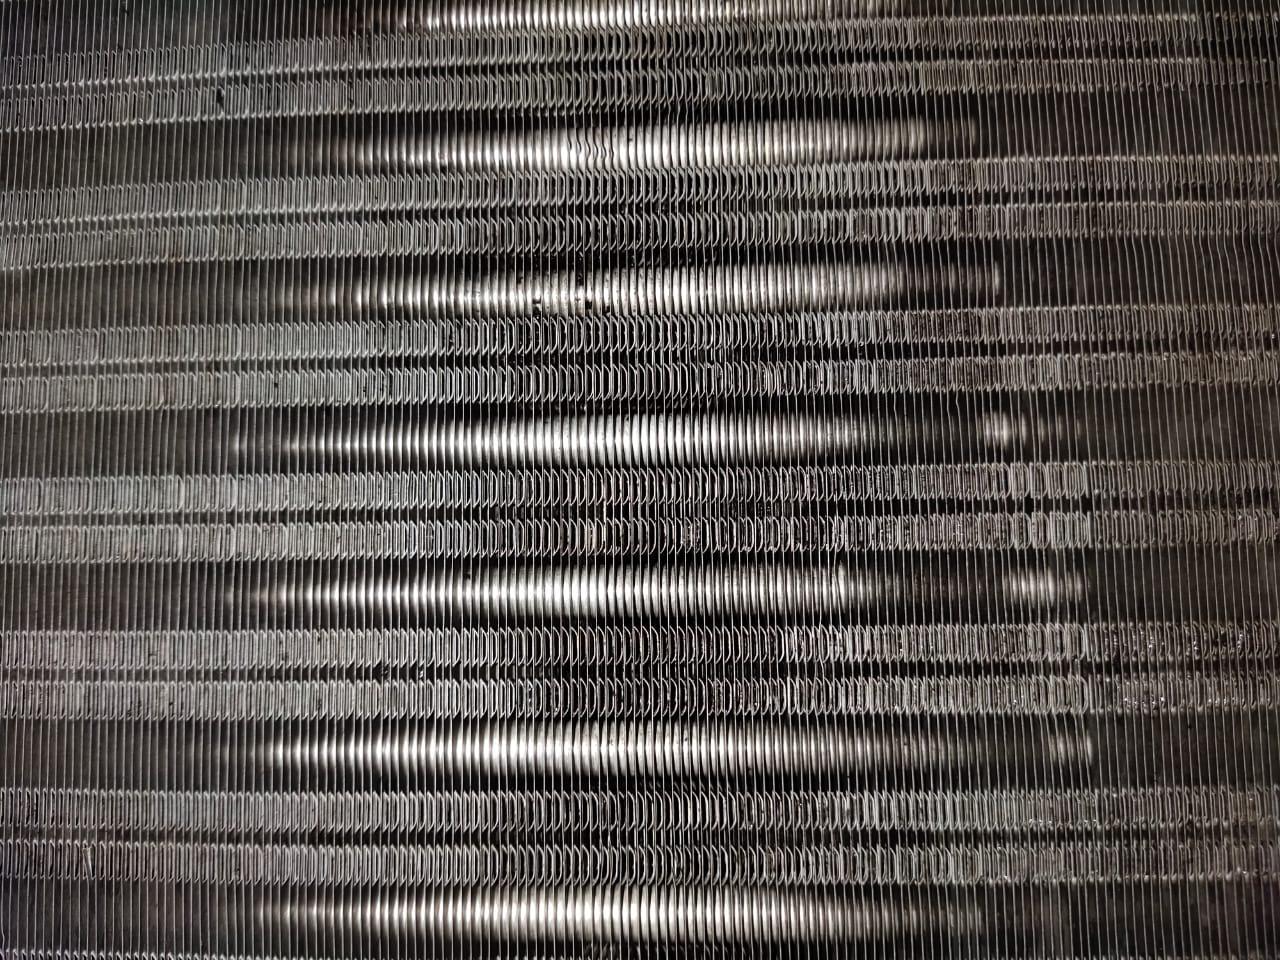 Coil Cleaning